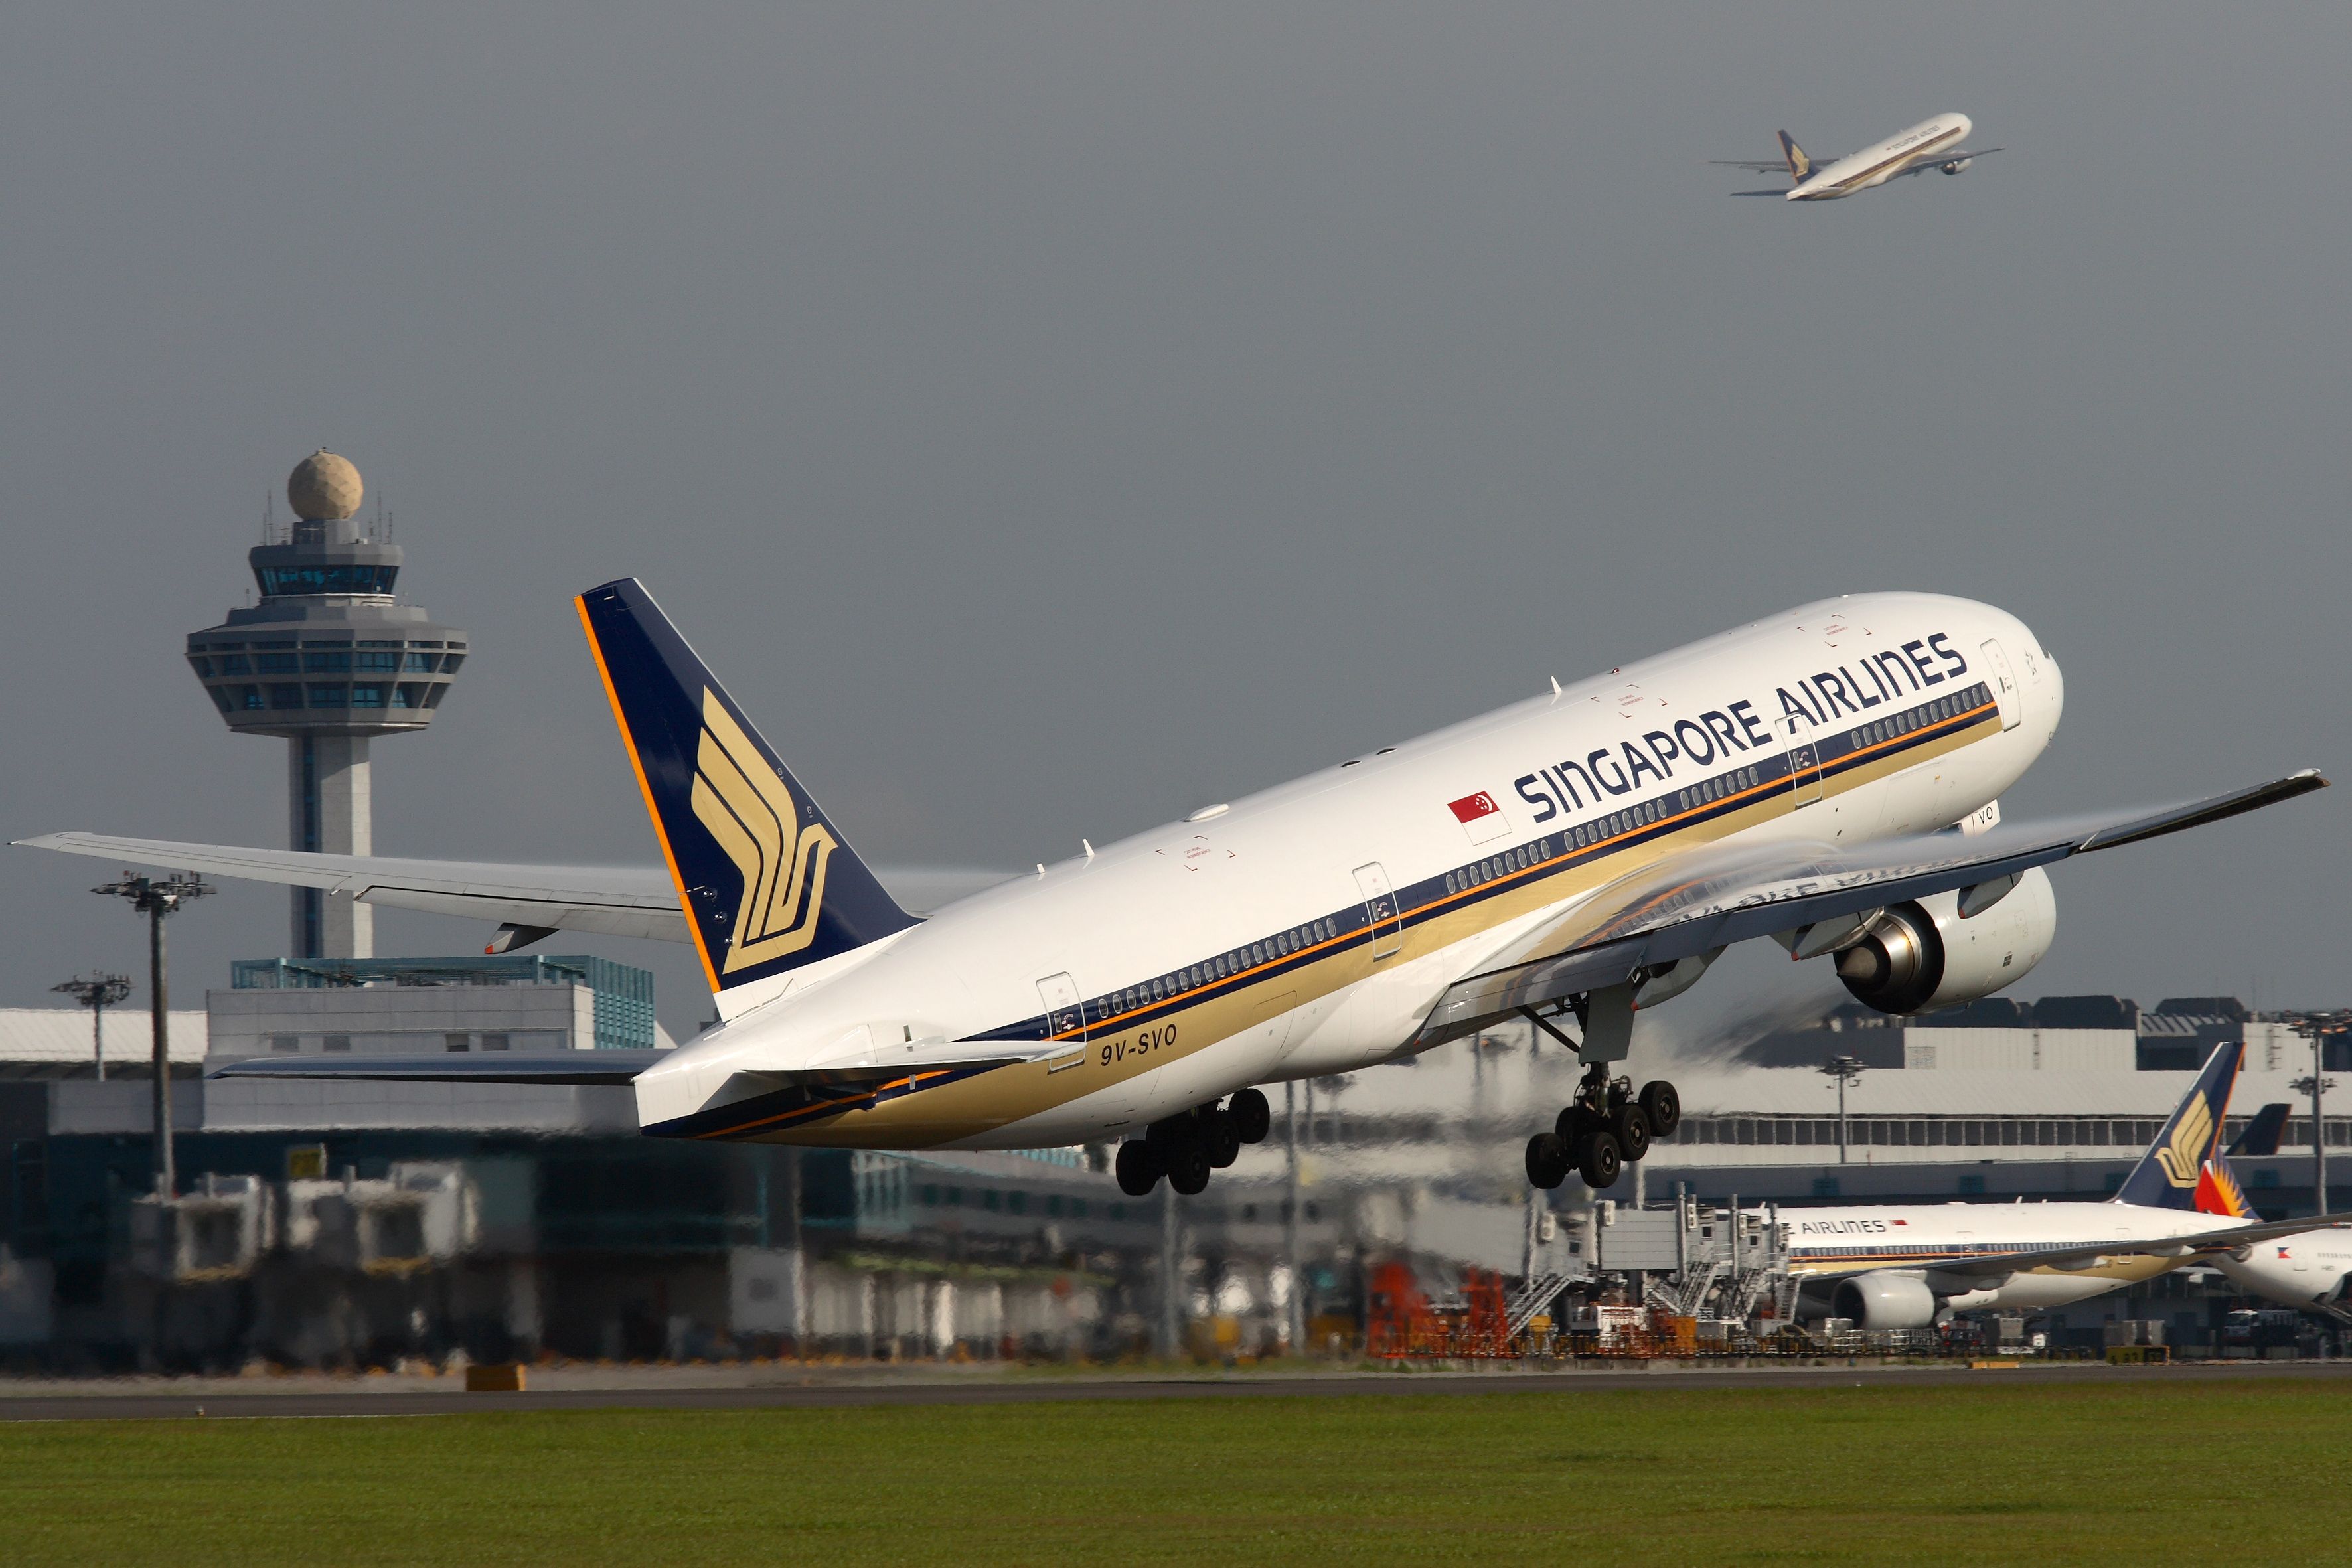 Two Singapore Airlines planes